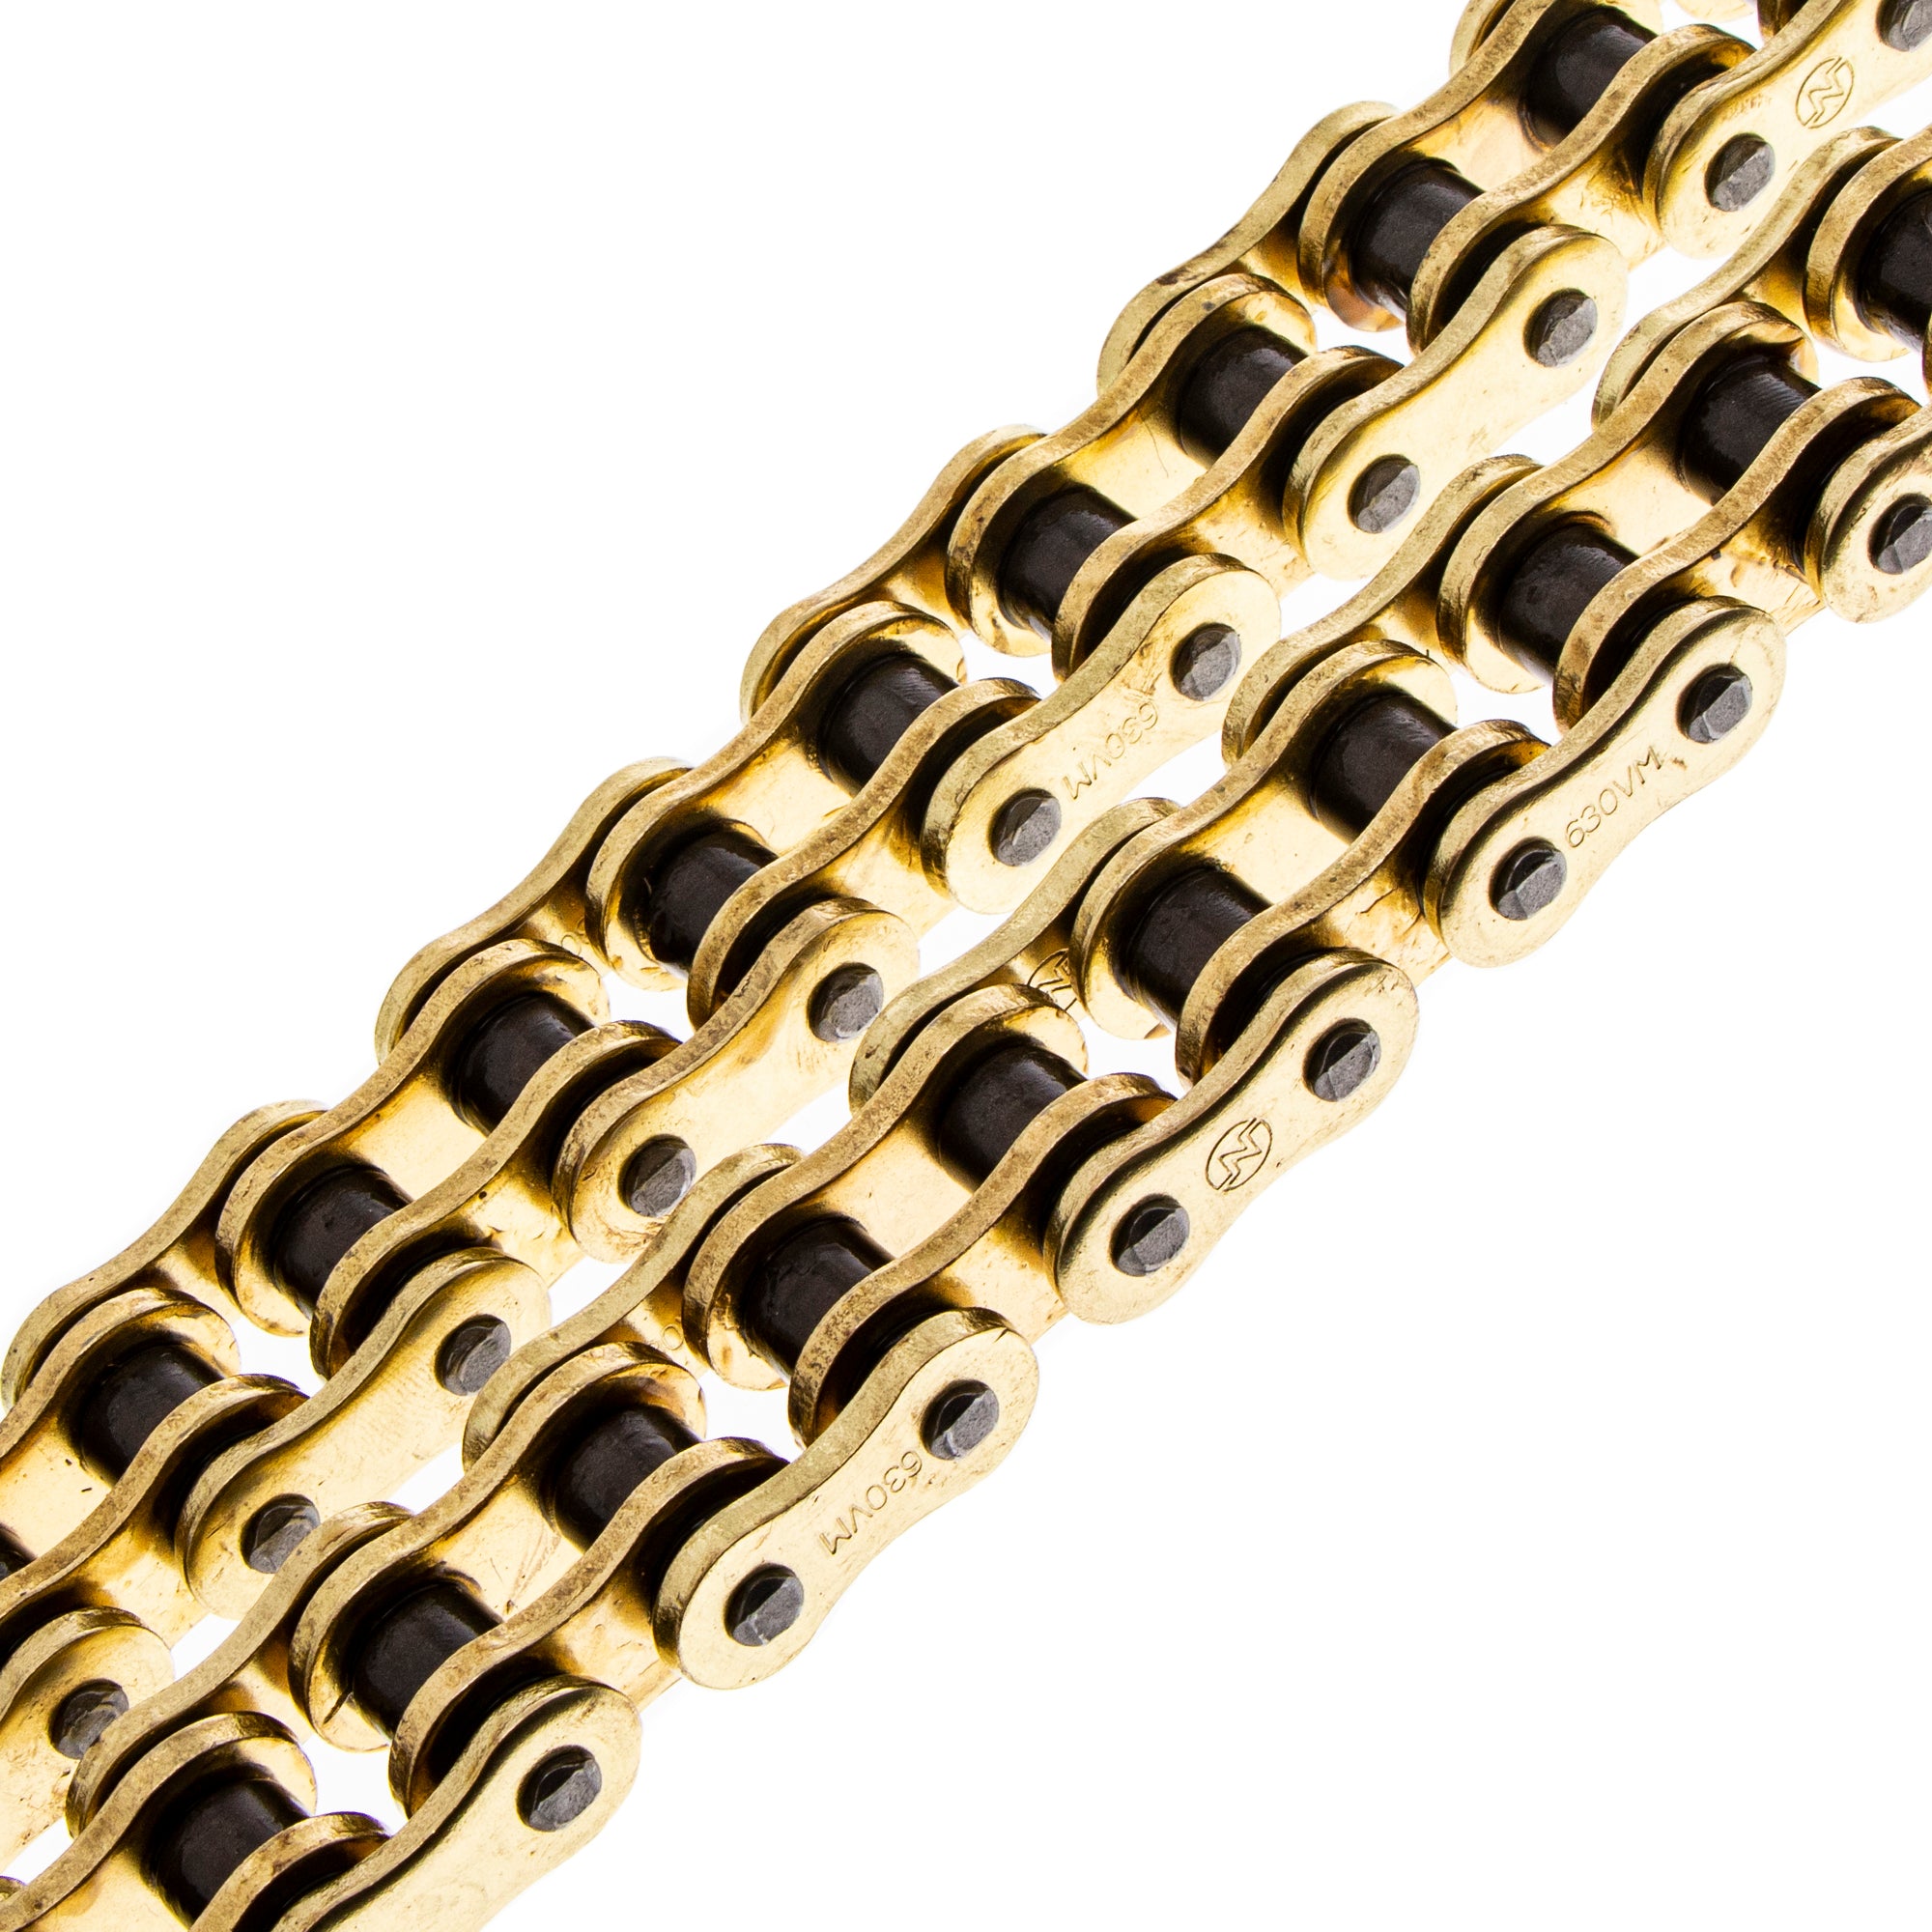 Gold X-Ring Chain 86 w/ Master Link for zOTHER 5524 NICHE 519-CDC2635H